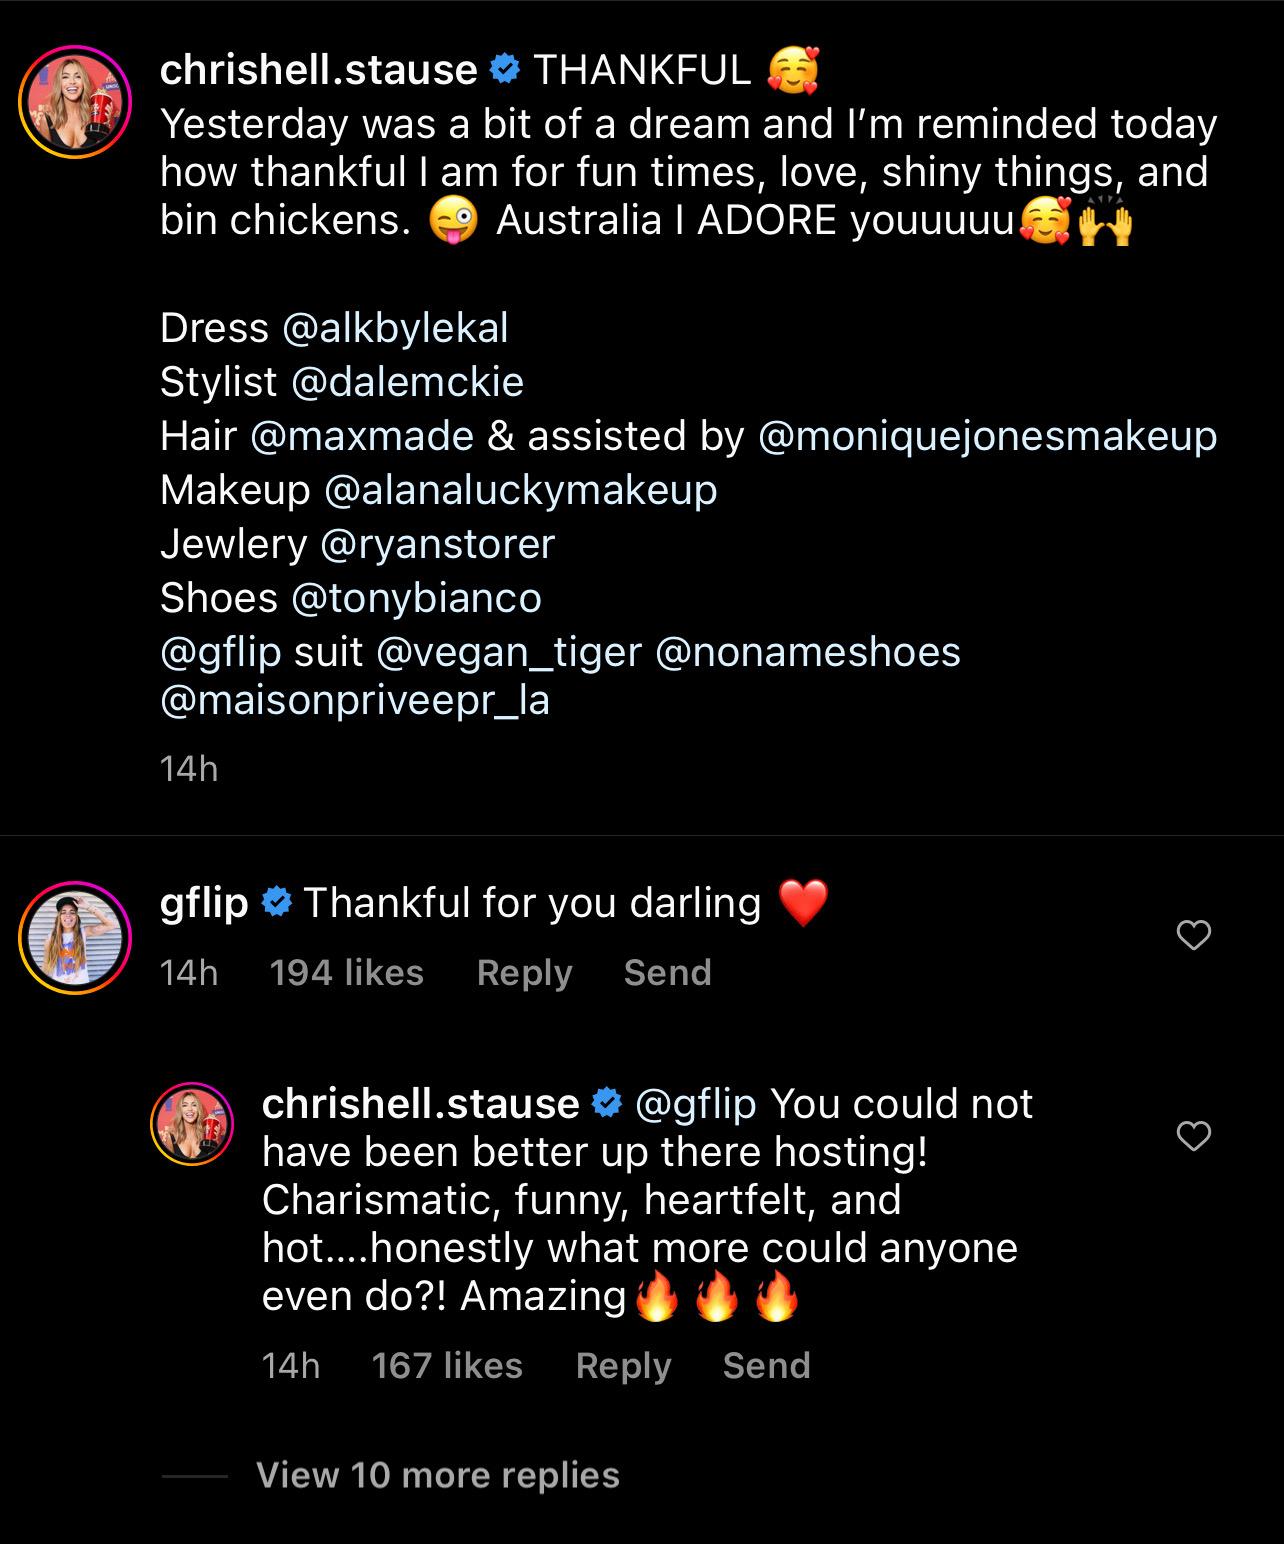 The comments of Chrishell Stause's post on her Instagram page